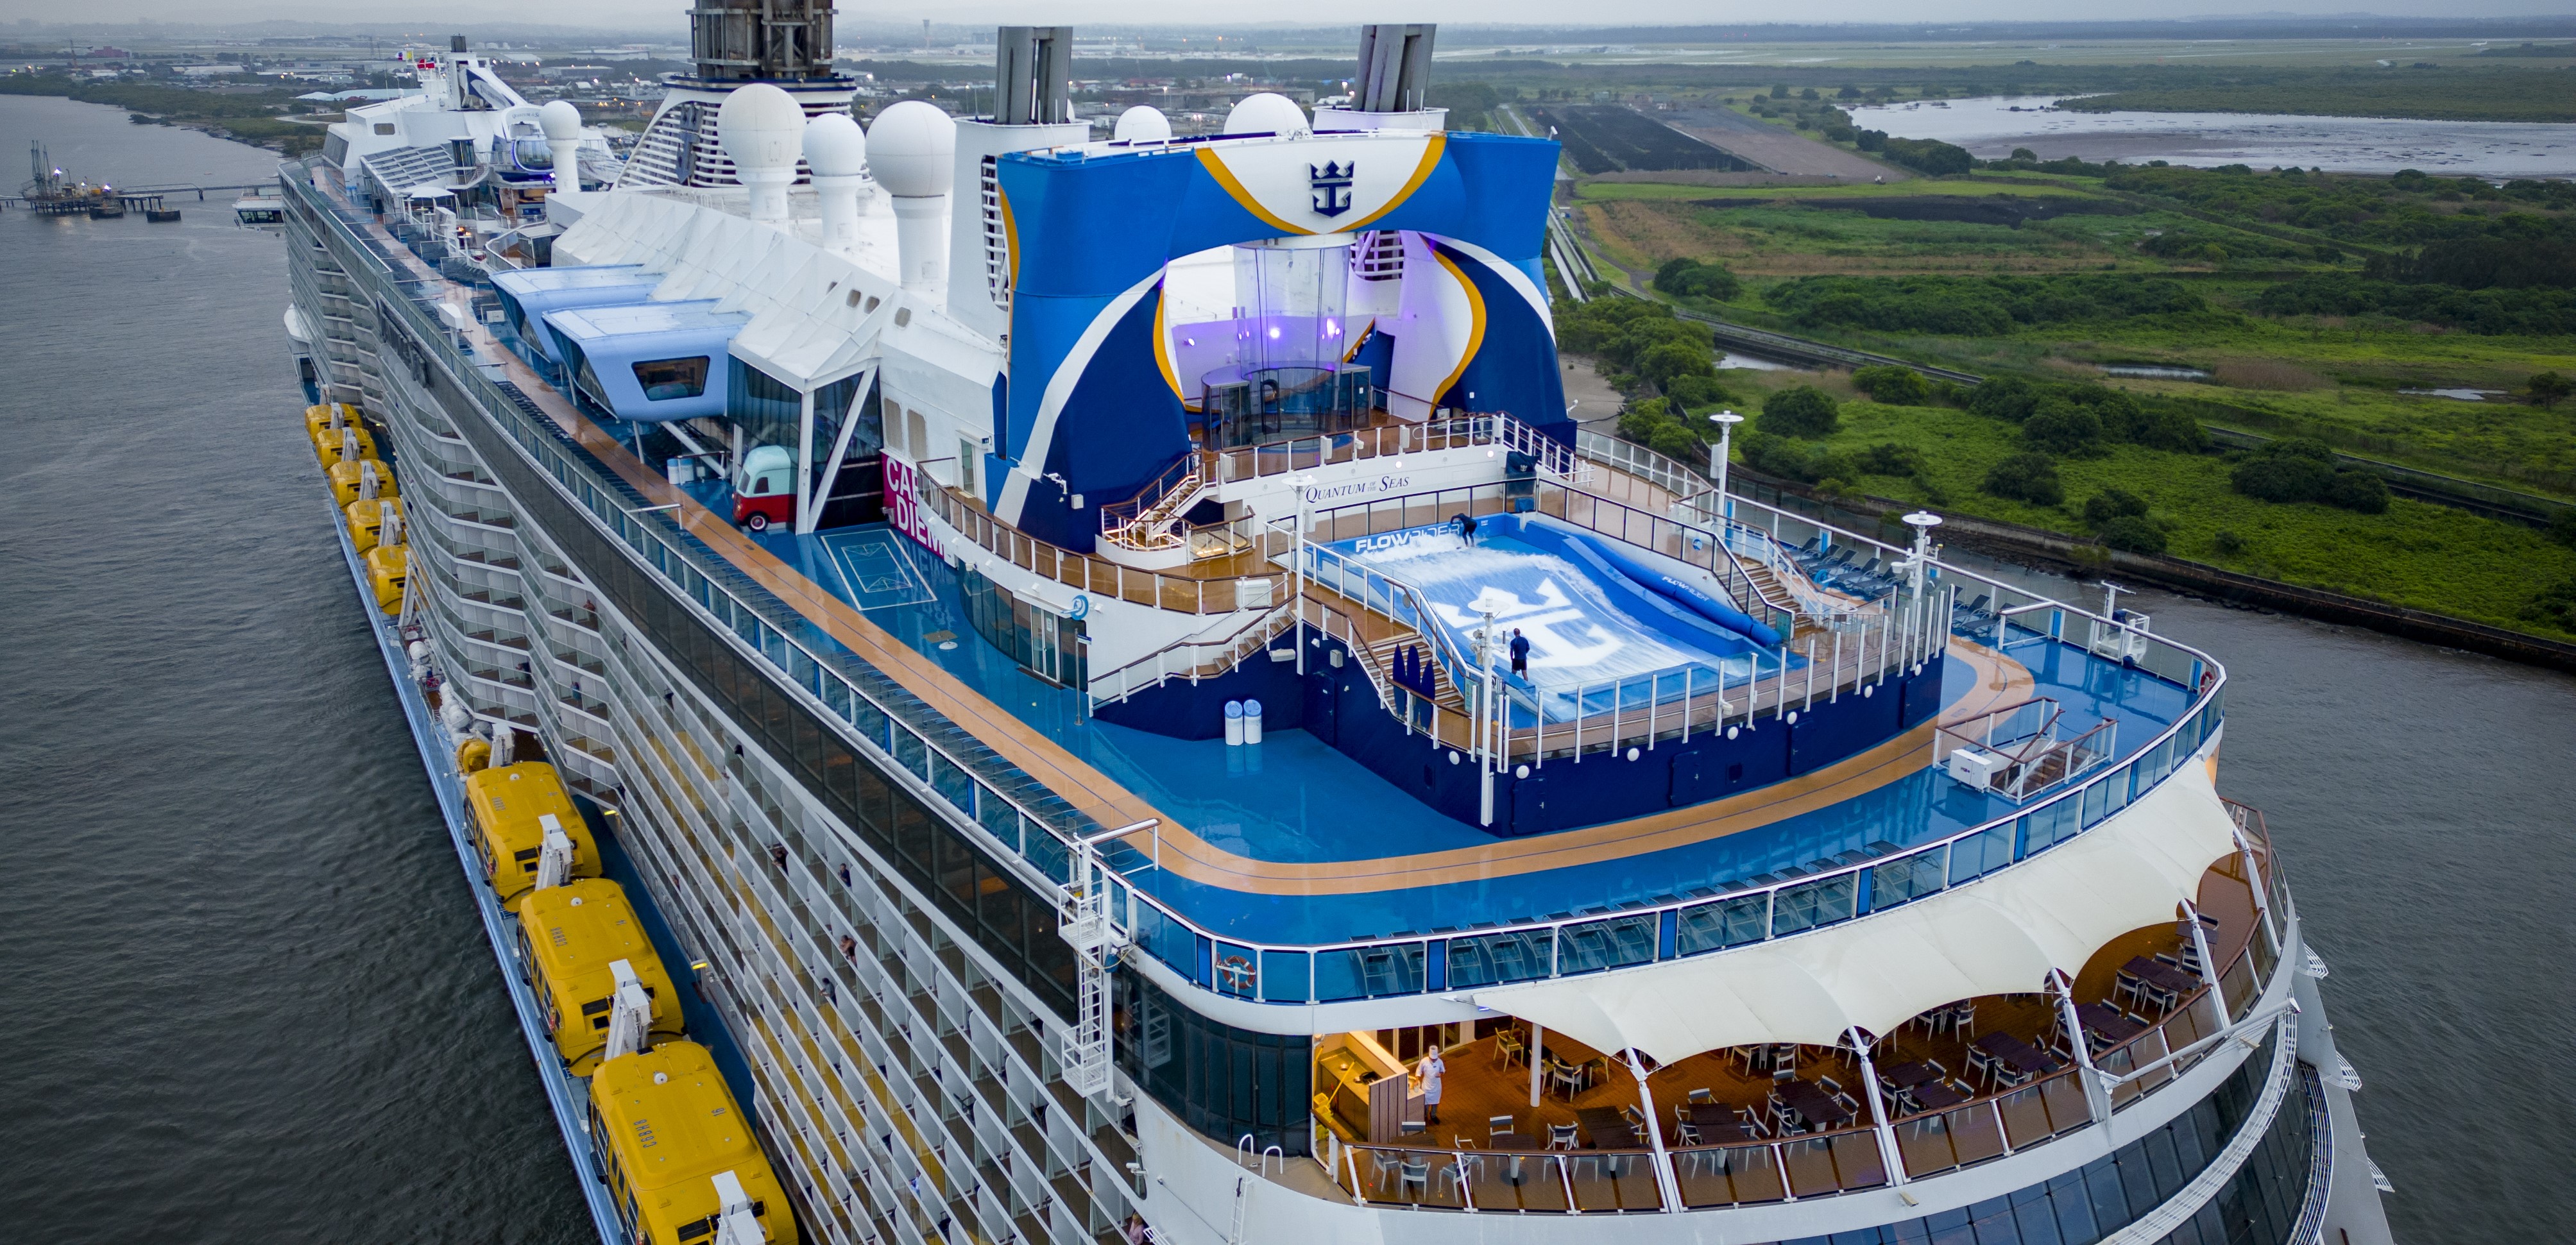 G’DAY BRISBANE ROYAL CARIBBEAN SETS SAIL FROM QUEENSLAND FOR FIRST TIME Royal Caribbean Press